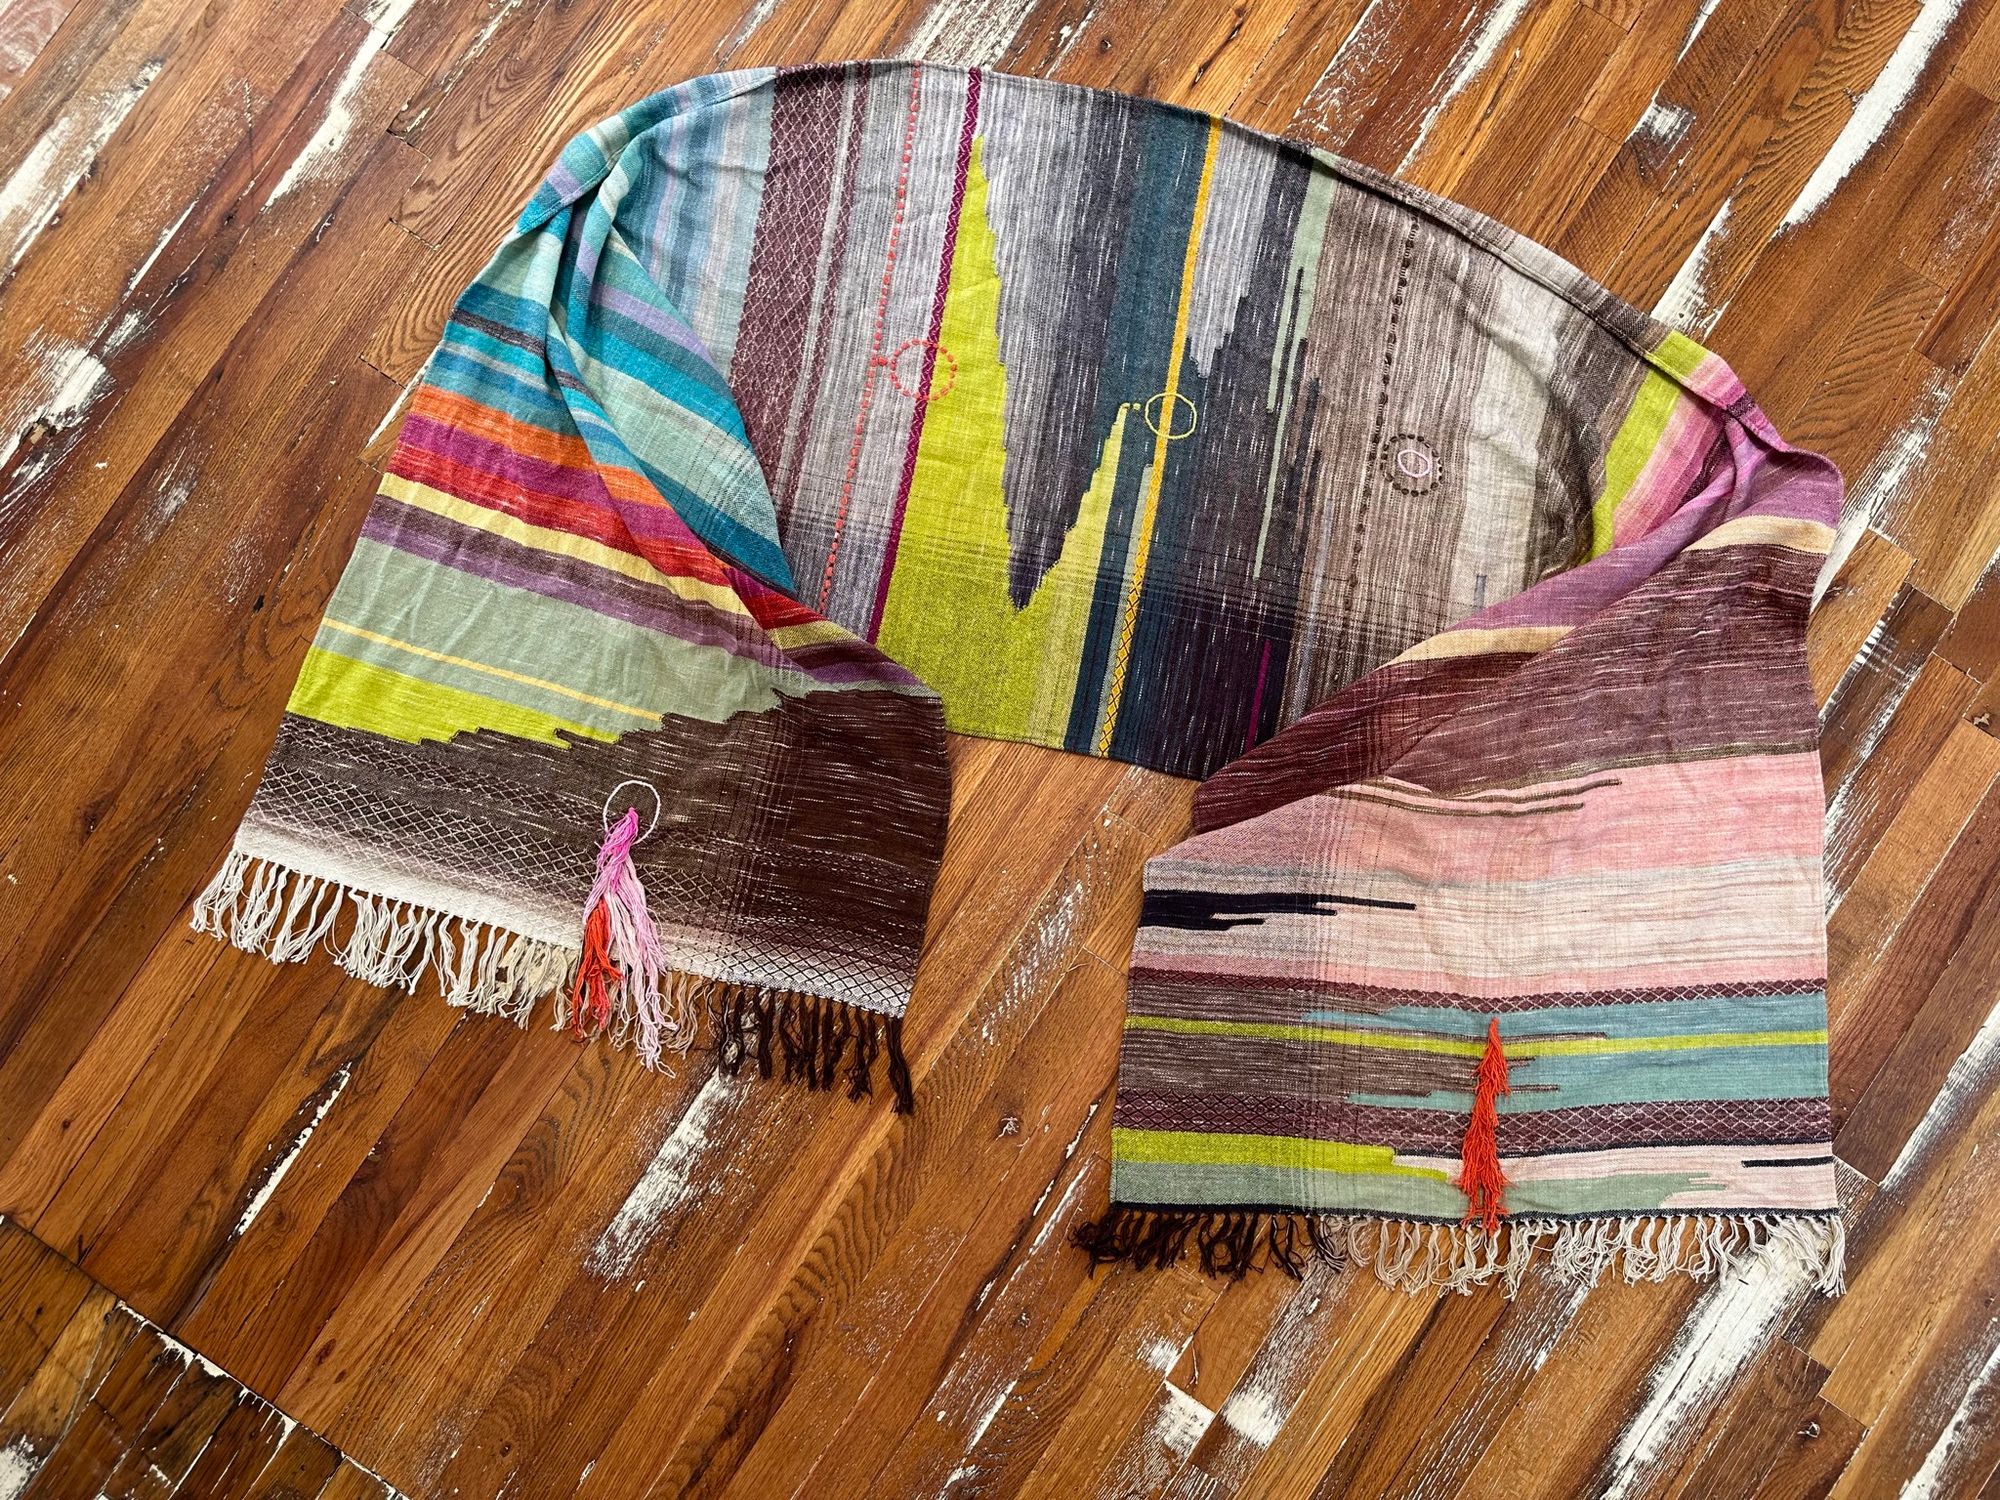 A detail of raw silk handwoven fabric in a rainbow of hand dyed colors with circular moon-like details laying on a wooden floor